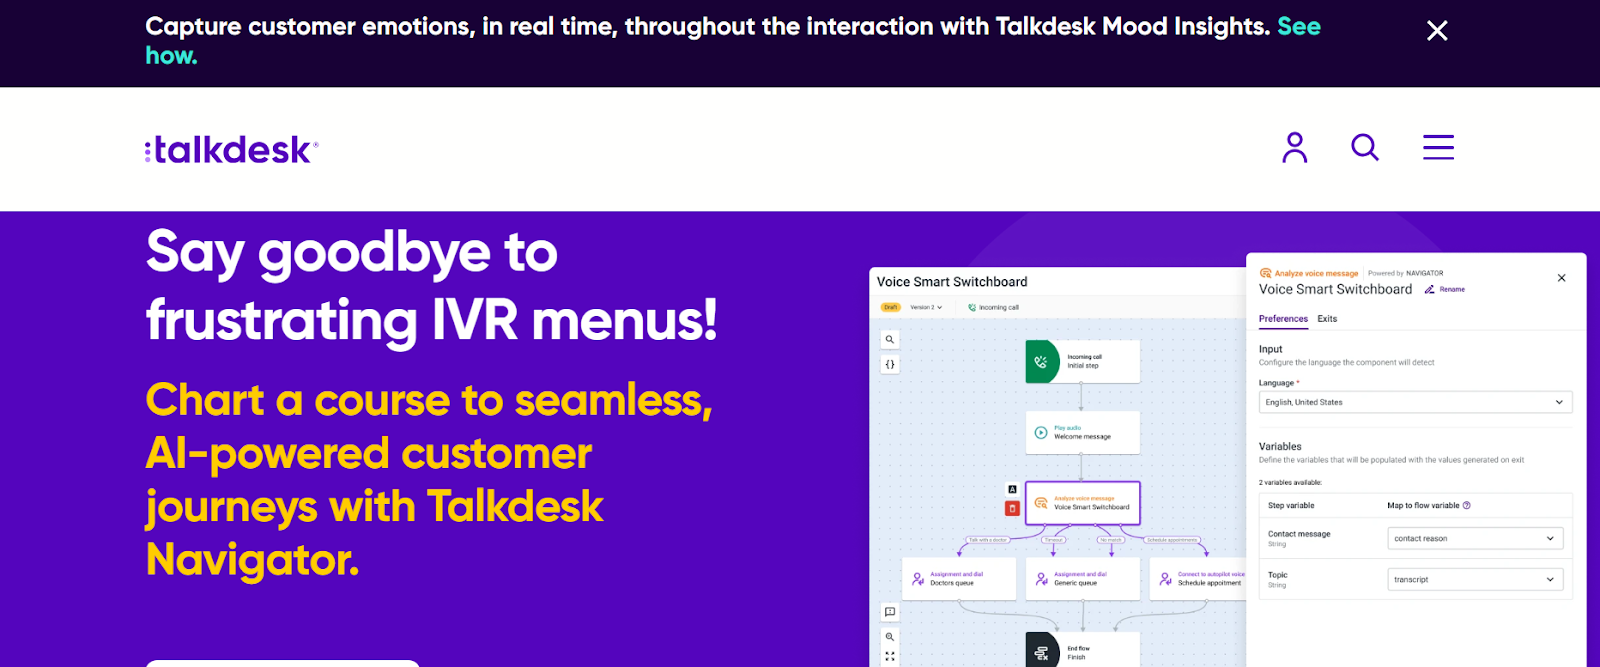 Talkdesk website snapshot highlighting the services it offers.